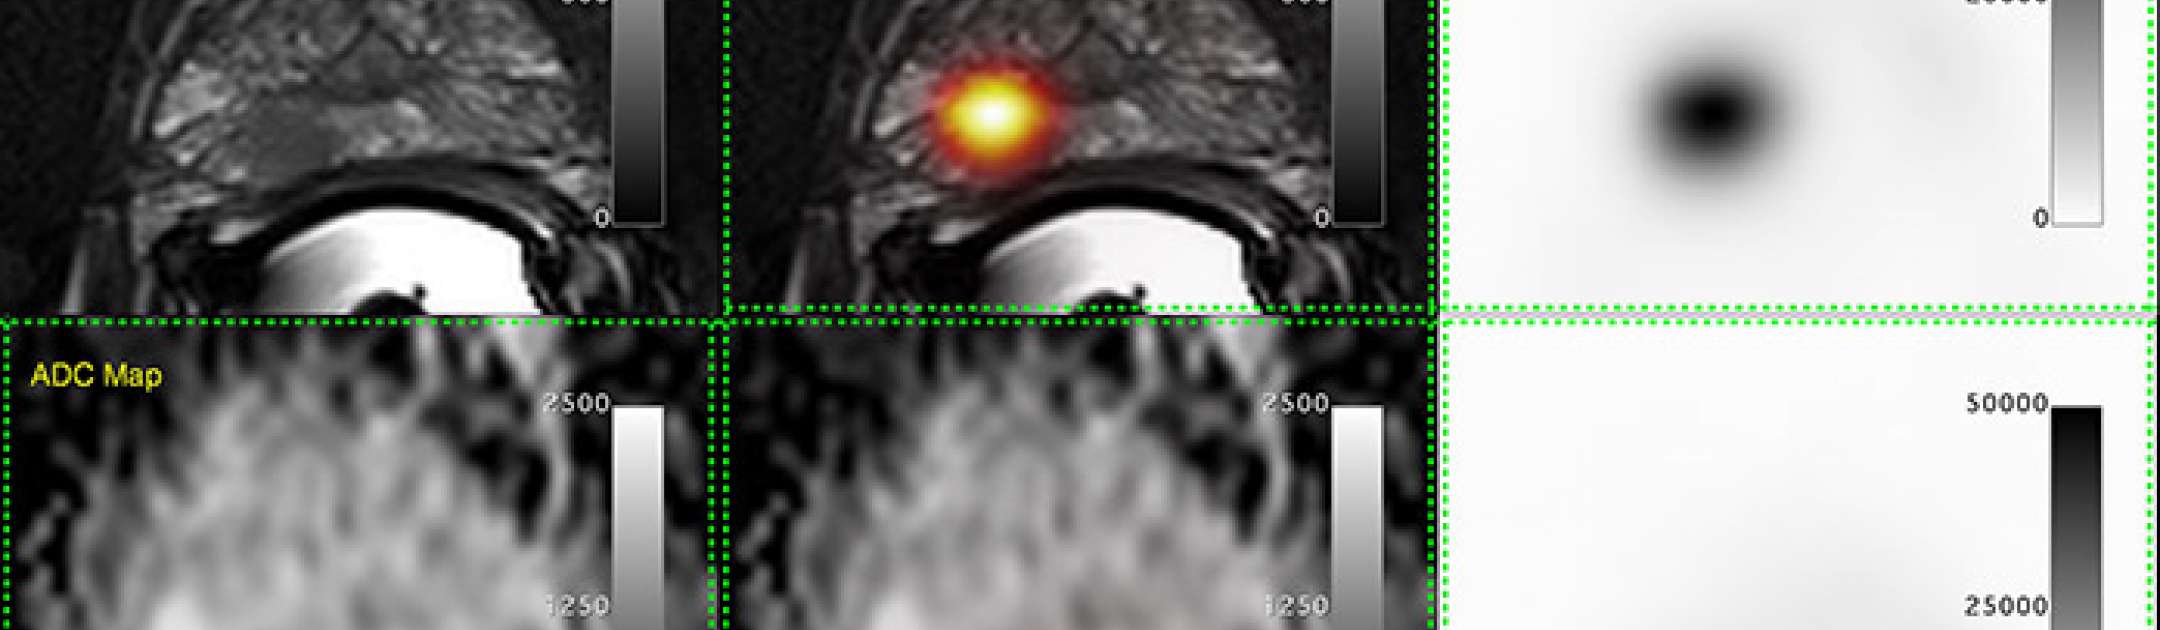 Image of PET/MRI scan showing prostate cancer that was captured using PSMA probe